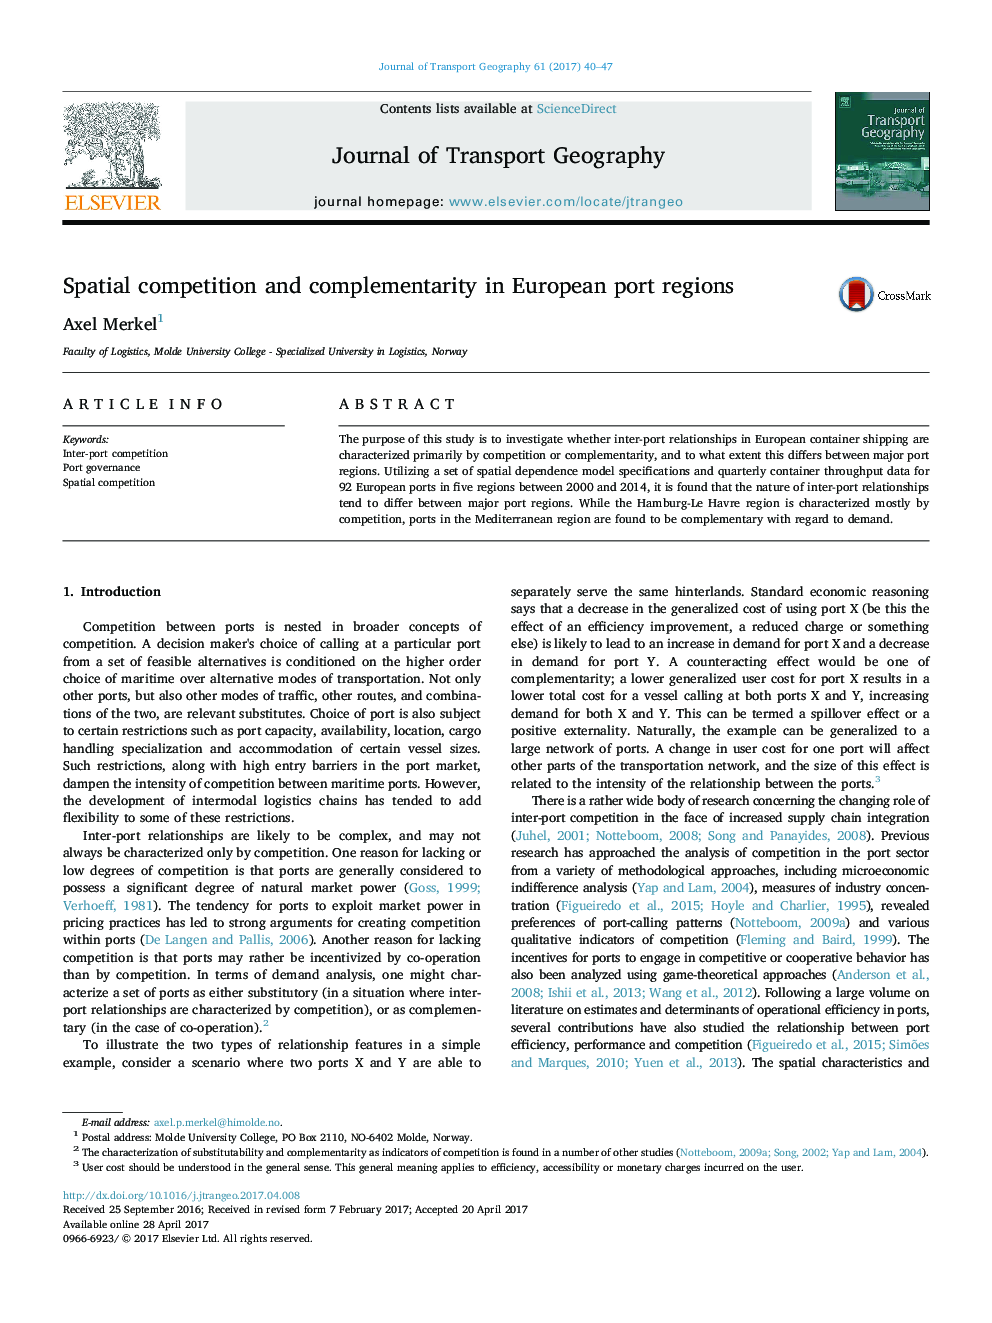 Spatial competition and complementarity in European port regions